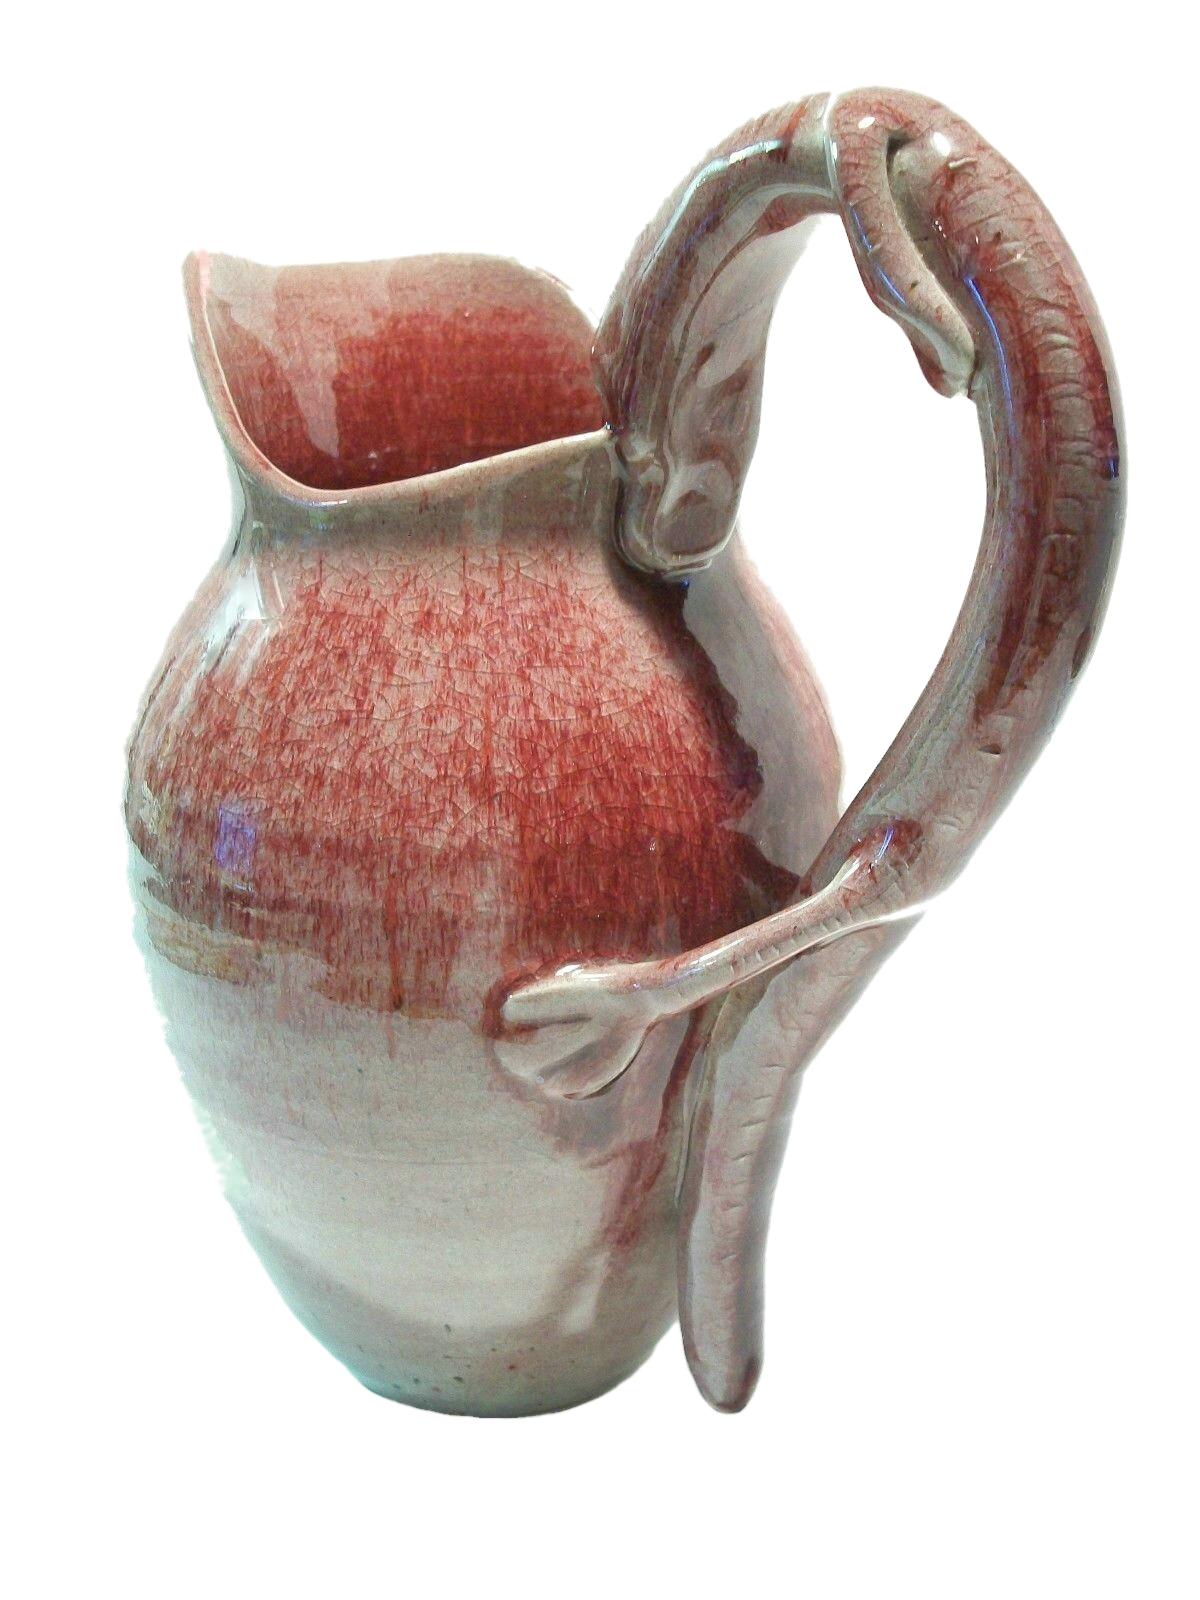 Vintage serpent handled wheel thrown studio pottery pitcher - elegant proportions - dramatic presence - hand modeled serpent clutching the edge of the vessel with its' mouth - the hind legs and tail fall to the base - a swirl of turquoise glaze to